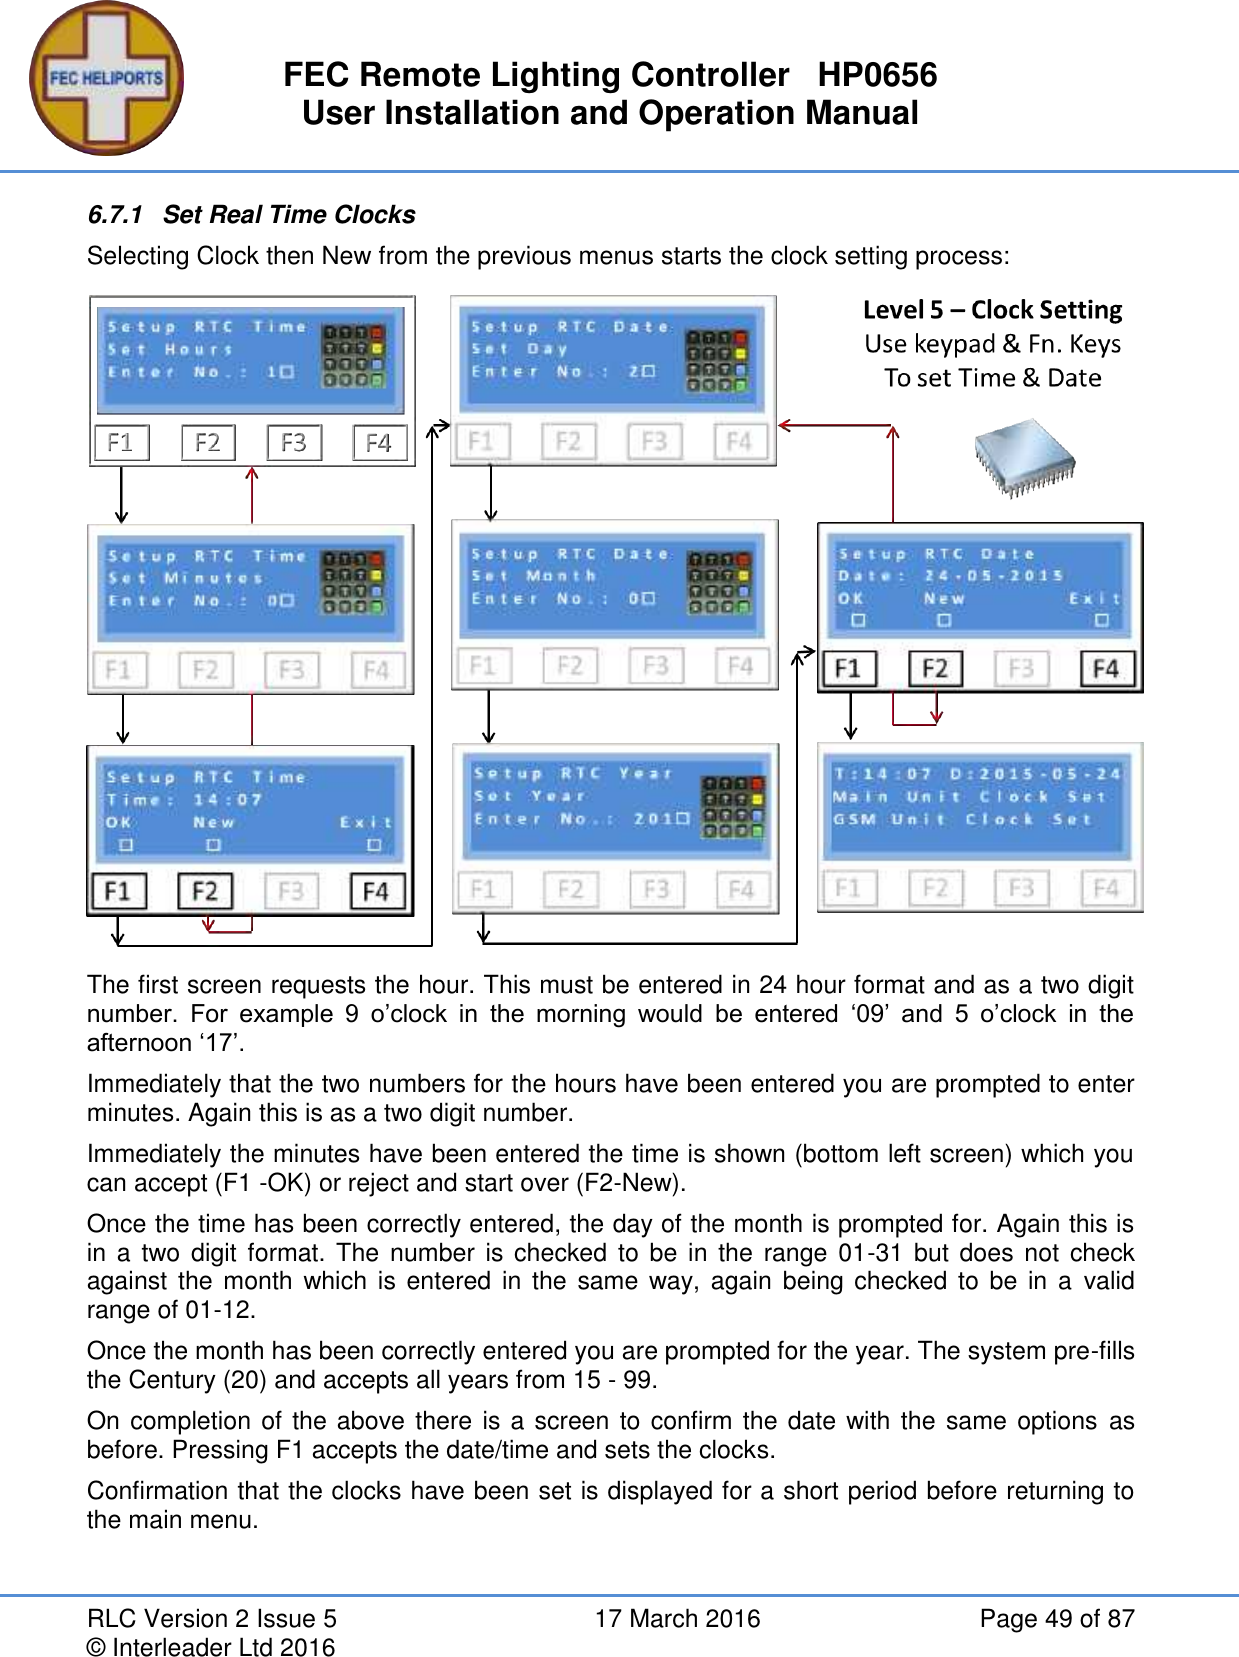 FEC Remote Lighting Controller   HP0656 User Installation and Operation Manual RLC Version 2 Issue 5  17 March 2016  Page 49 of 87 © Interleader Ltd 2016 6.7.1  Set Real Time Clocks Selecting Clock then New from the previous menus starts the clock setting process:  The first screen requests the hour. This must be entered in 24 hour format and as a two digit number.  For  example  9  o’clock  in  the  morning  would  be  entered  ‘09’  and  5  o’clock  in  the afternoon ‘17’. Immediately that the two numbers for the hours have been entered you are prompted to enter minutes. Again this is as a two digit number. Immediately the minutes have been entered the time is shown (bottom left screen) which you can accept (F1 -OK) or reject and start over (F2-New). Once the time has been correctly entered, the day of the month is prompted for. Again this is in a  two digit format. The number is  checked  to  be  in  the  range  01-31  but  does  not  check against the month  which  is entered in  the  same  way, again  being checked to  be  in  a  valid range of 01-12. Once the month has been correctly entered you are prompted for the year. The system pre-fills the Century (20) and accepts all years from 15 - 99. On completion of the above there is a screen to confirm the date with the same options as before. Pressing F1 accepts the date/time and sets the clocks. Confirmation that the clocks have been set is displayed for a short period before returning to the main menu.   